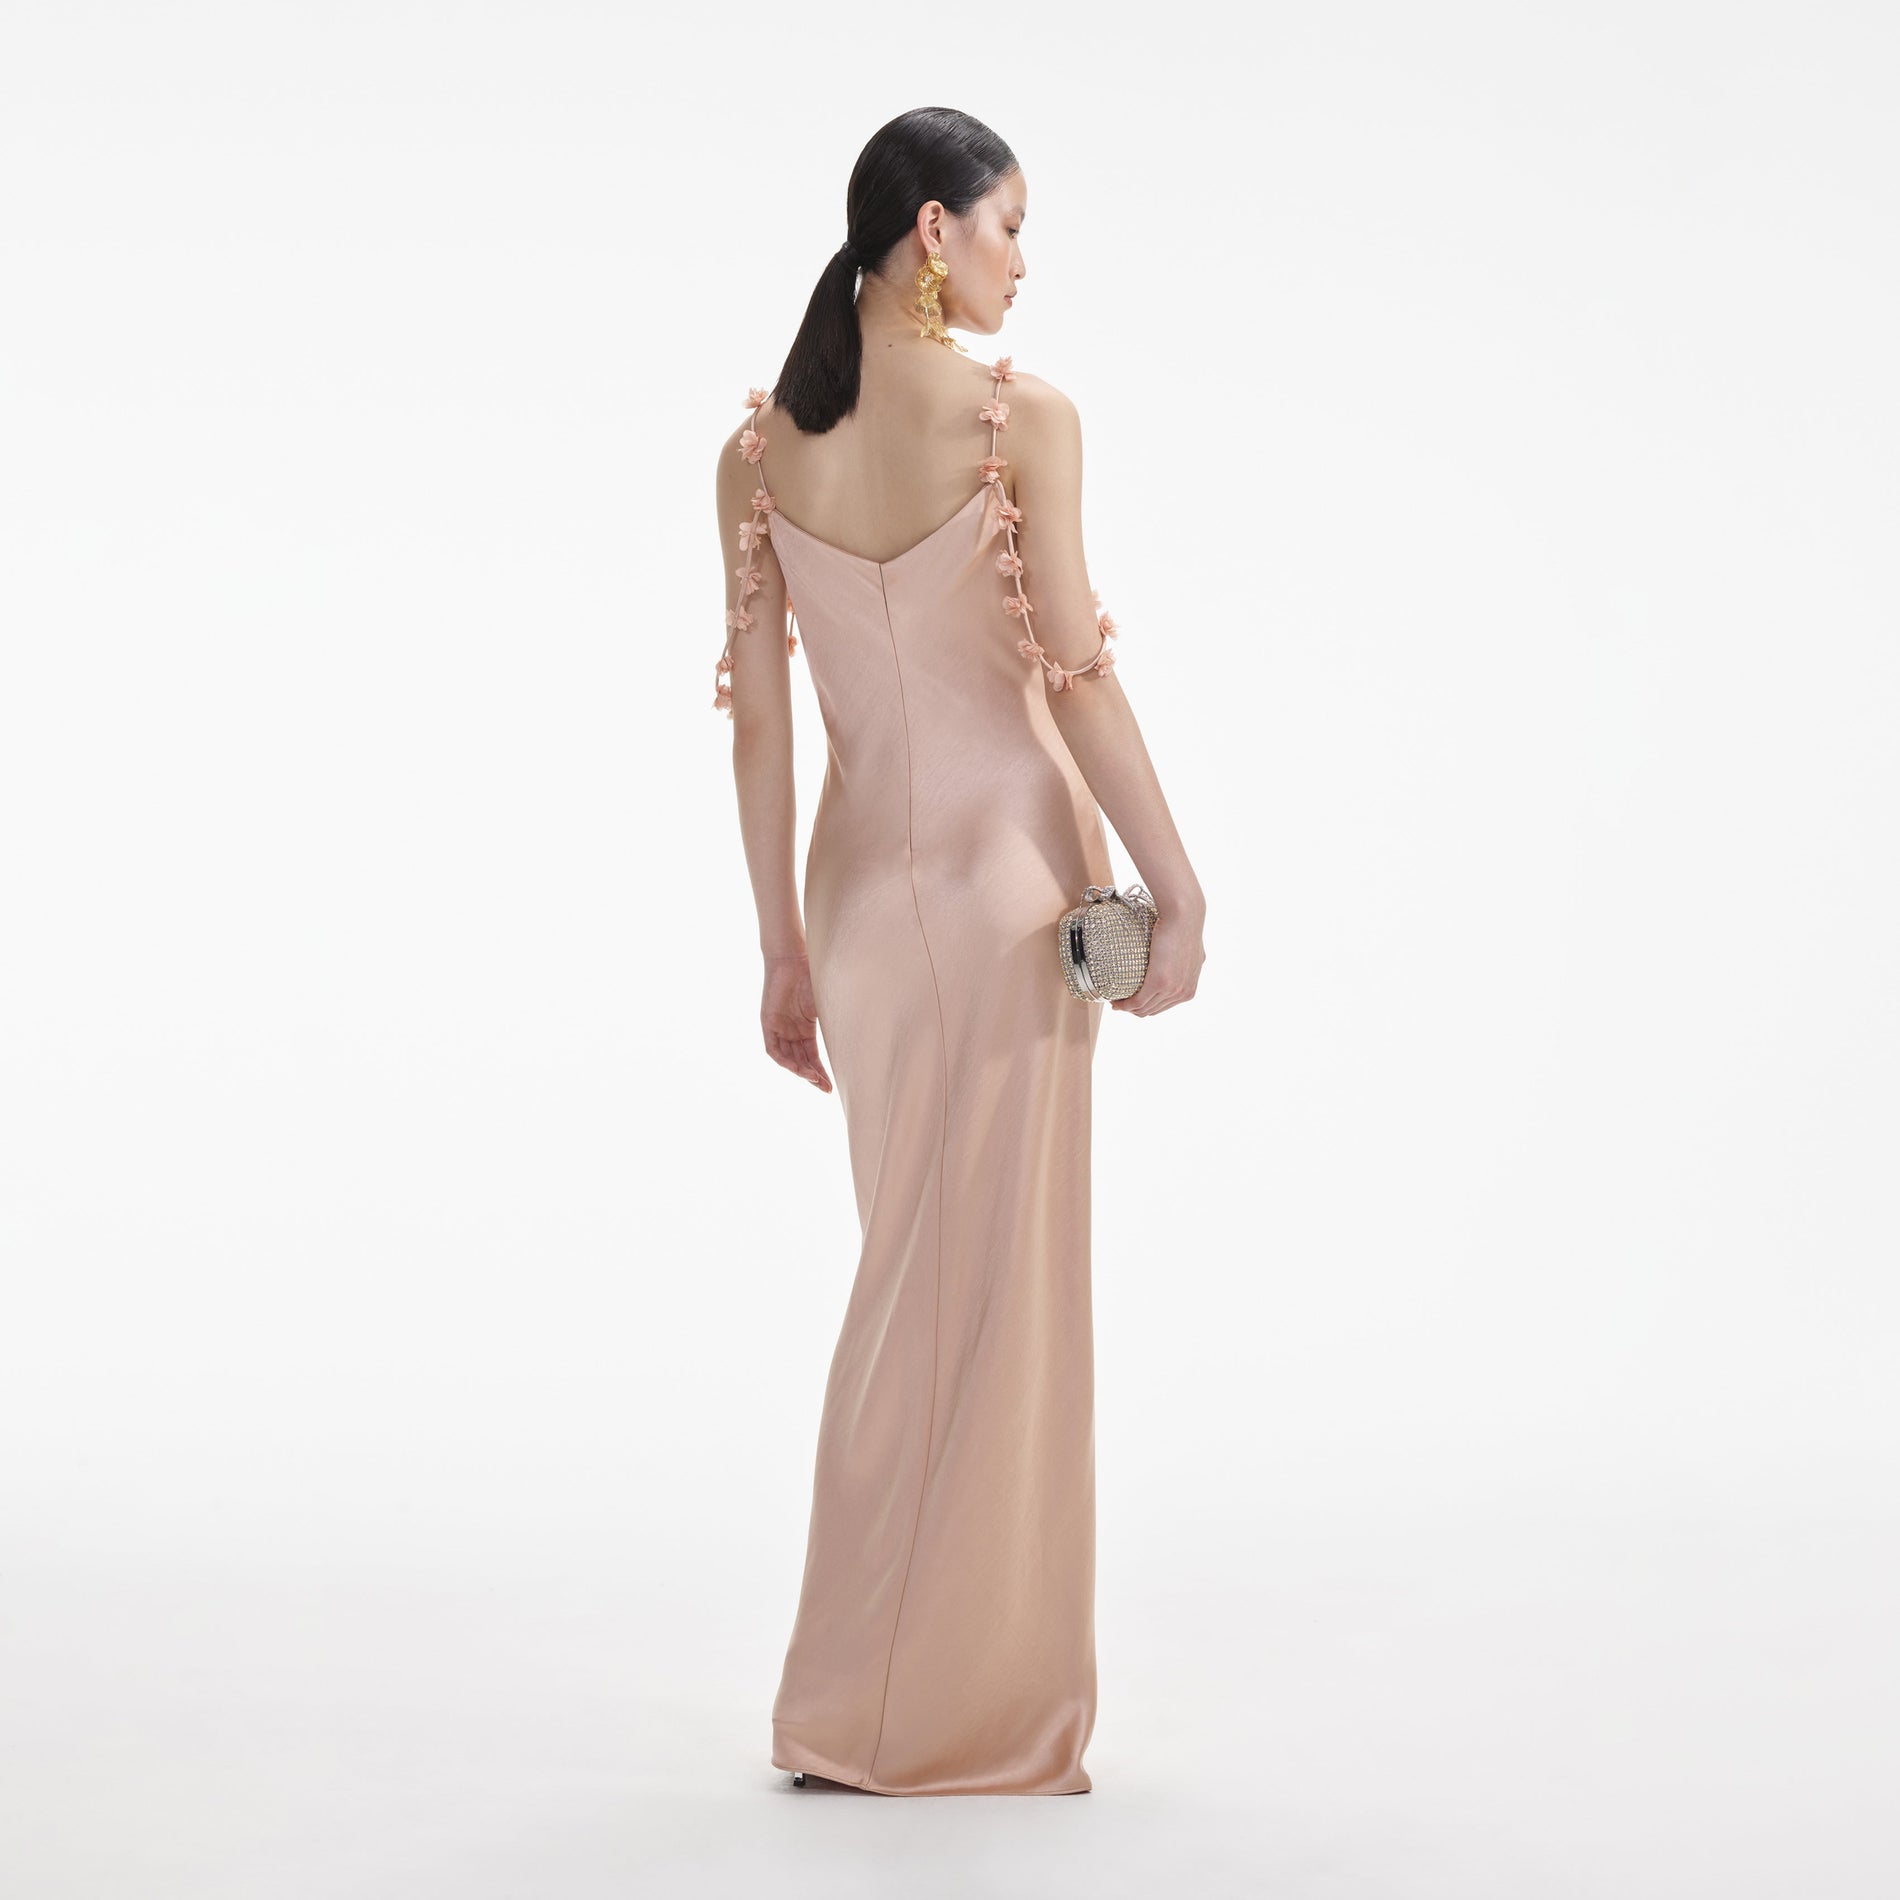 Back view of a woman wearing the White Rose Gold Satin Flower Maxi Dress